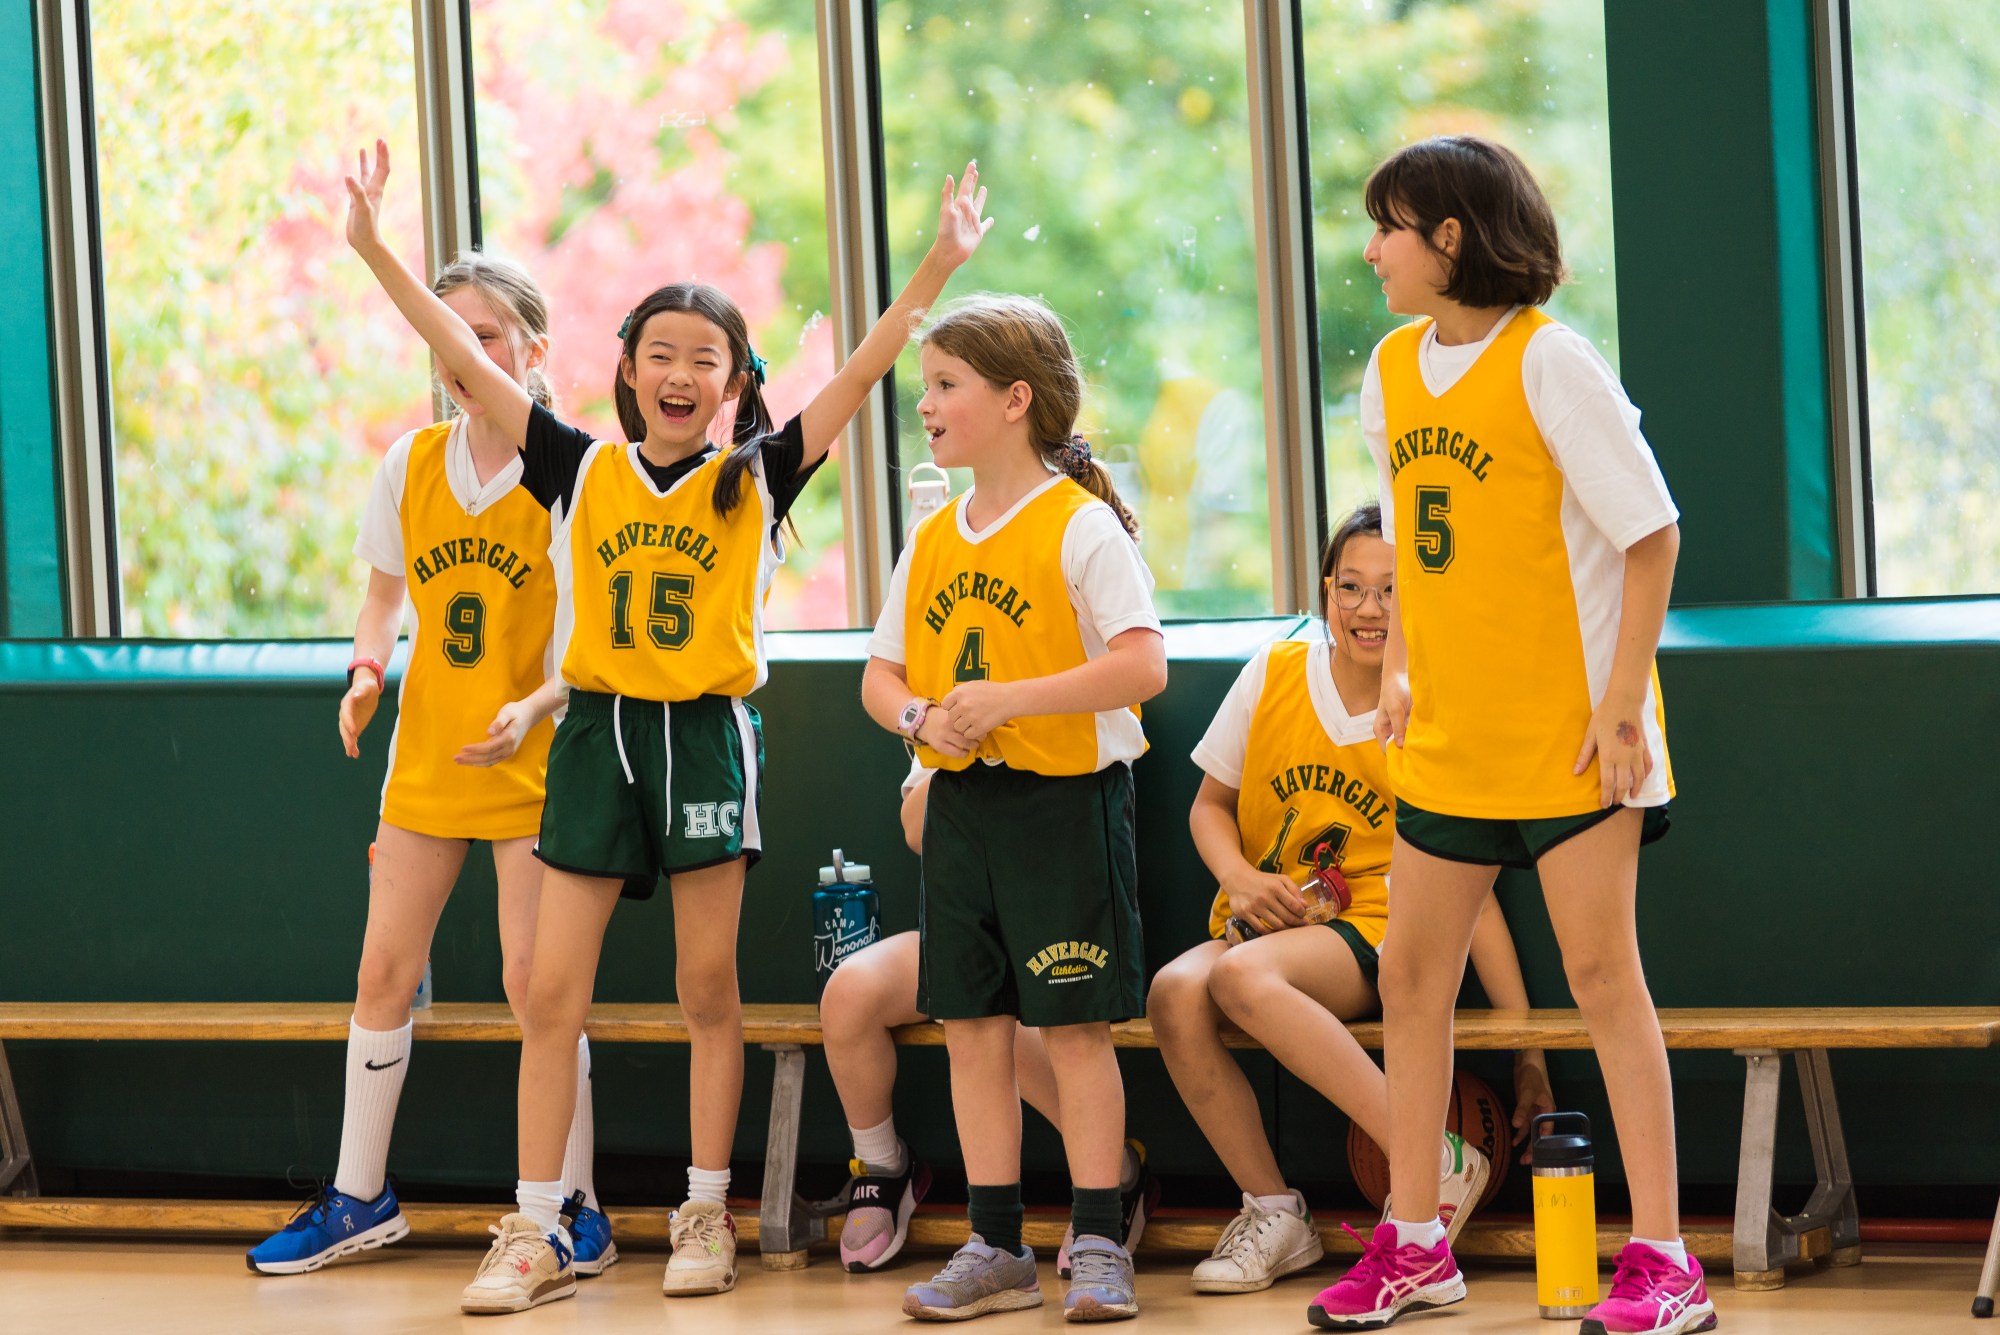 Junior School student cheering at a basketball game.